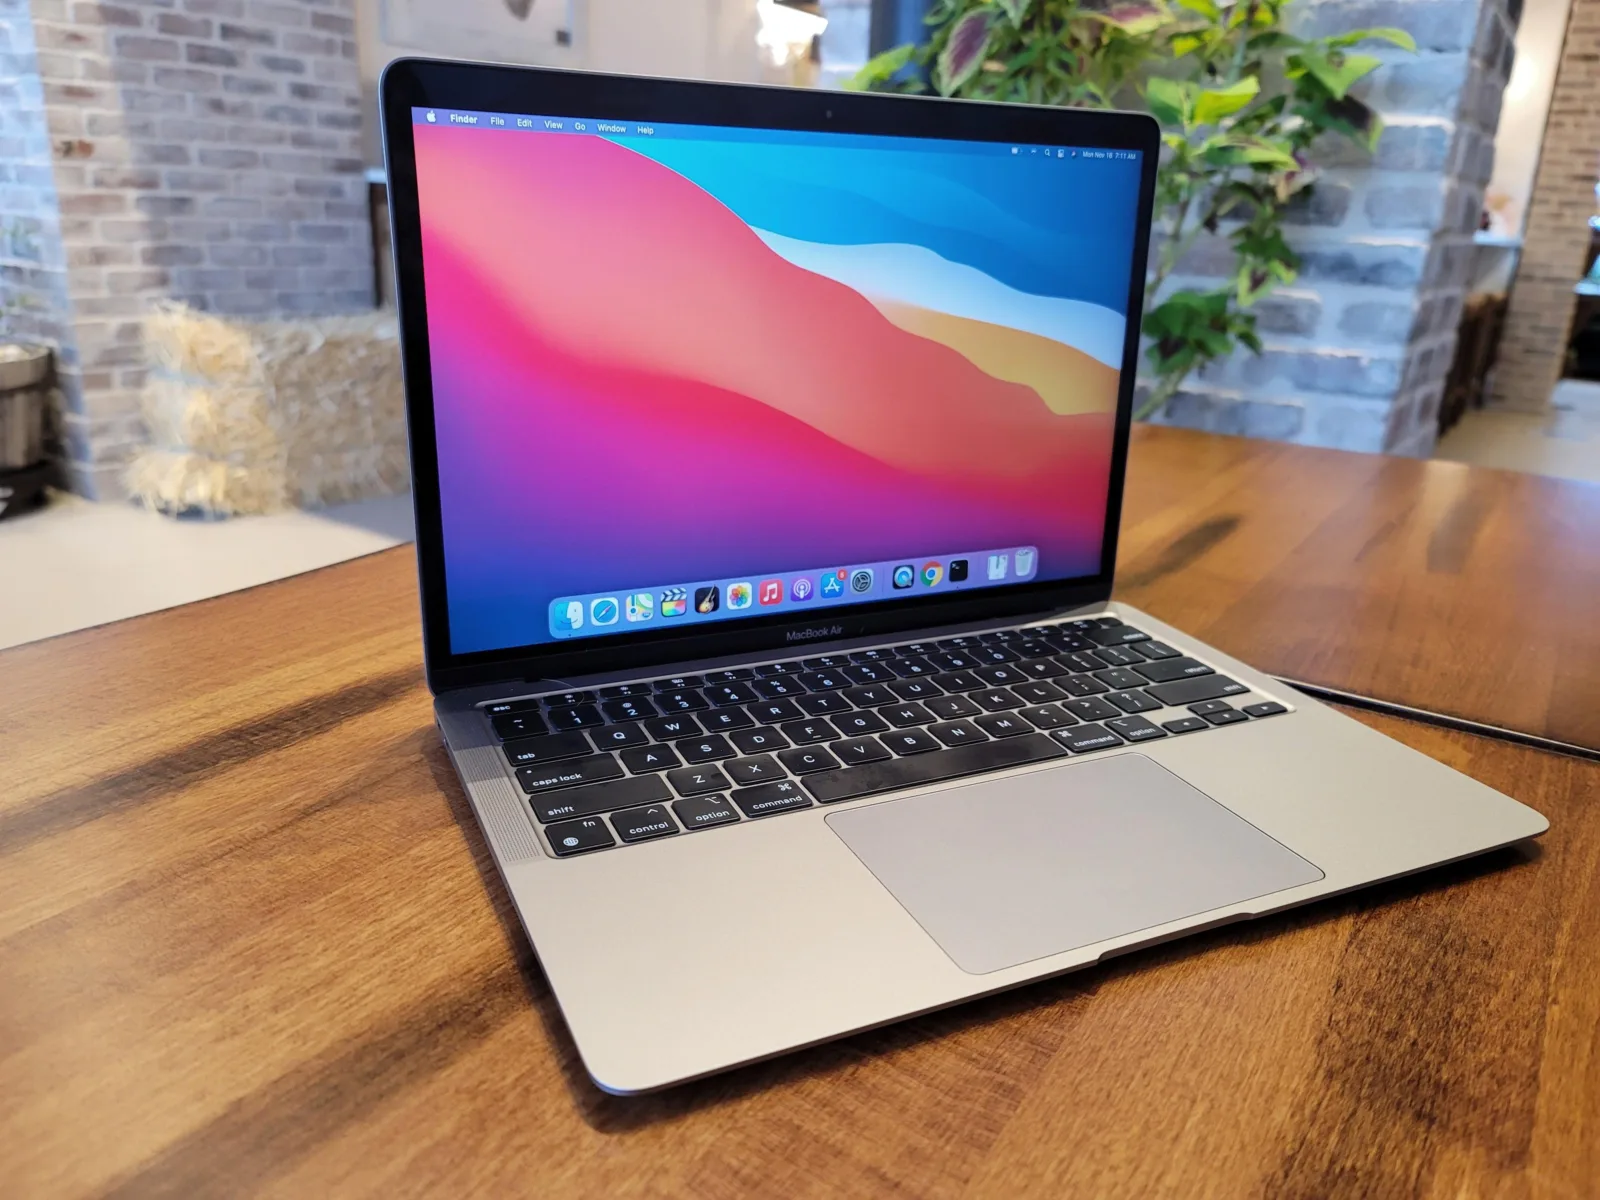 How To Check For Driver Updates on Mac 1